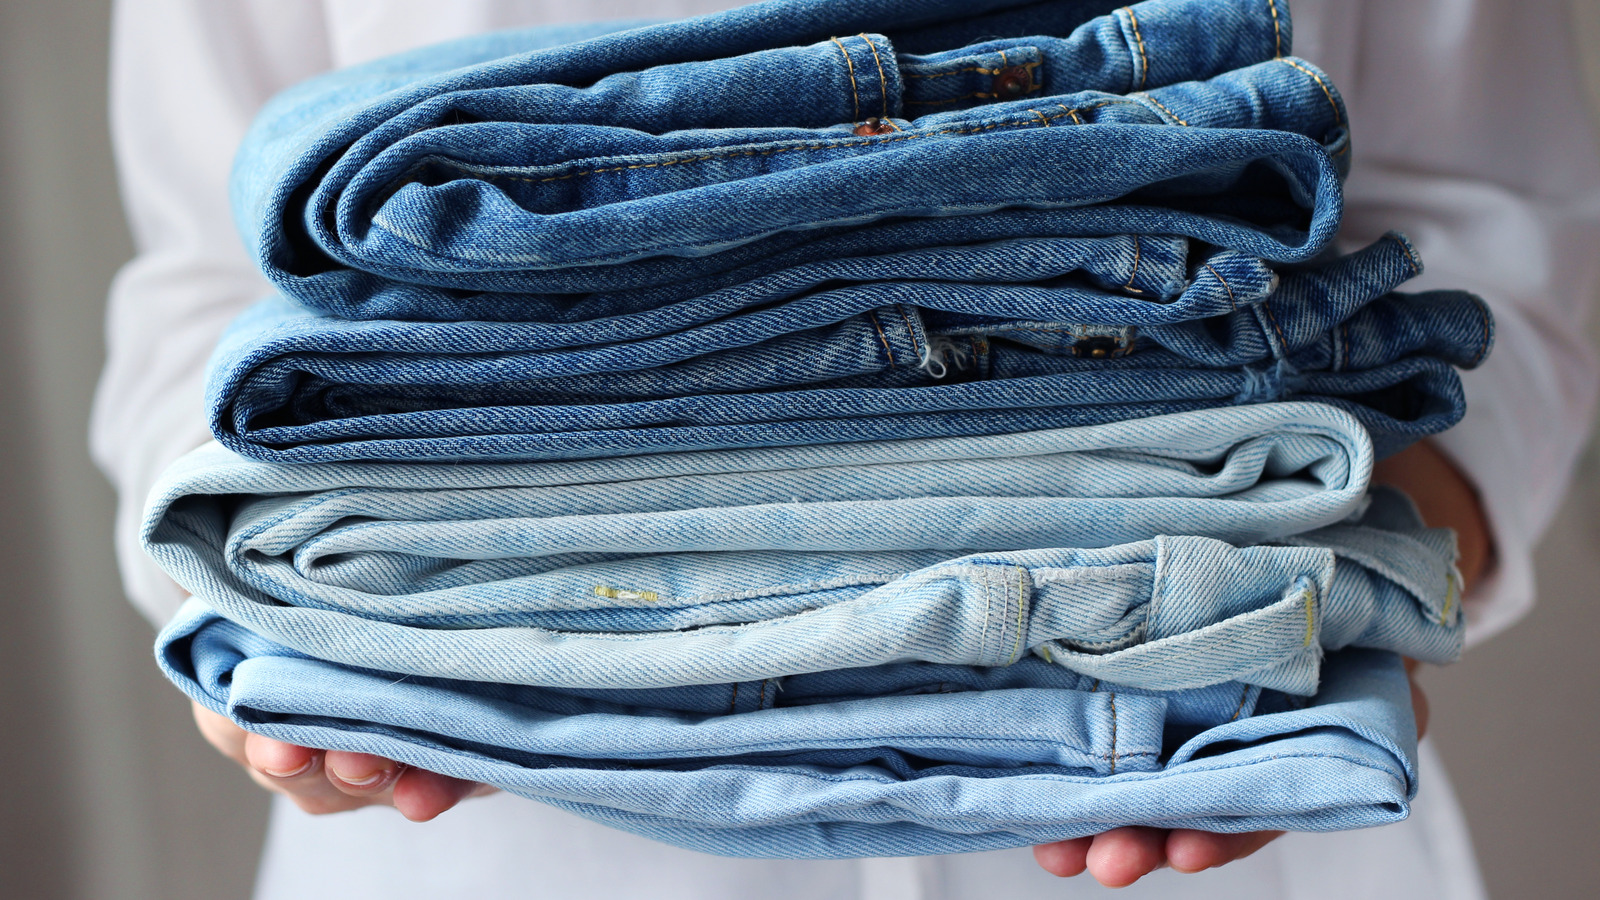 Folding Your Jeans This Way Can Make Your Closet Look Like A Gap Ad